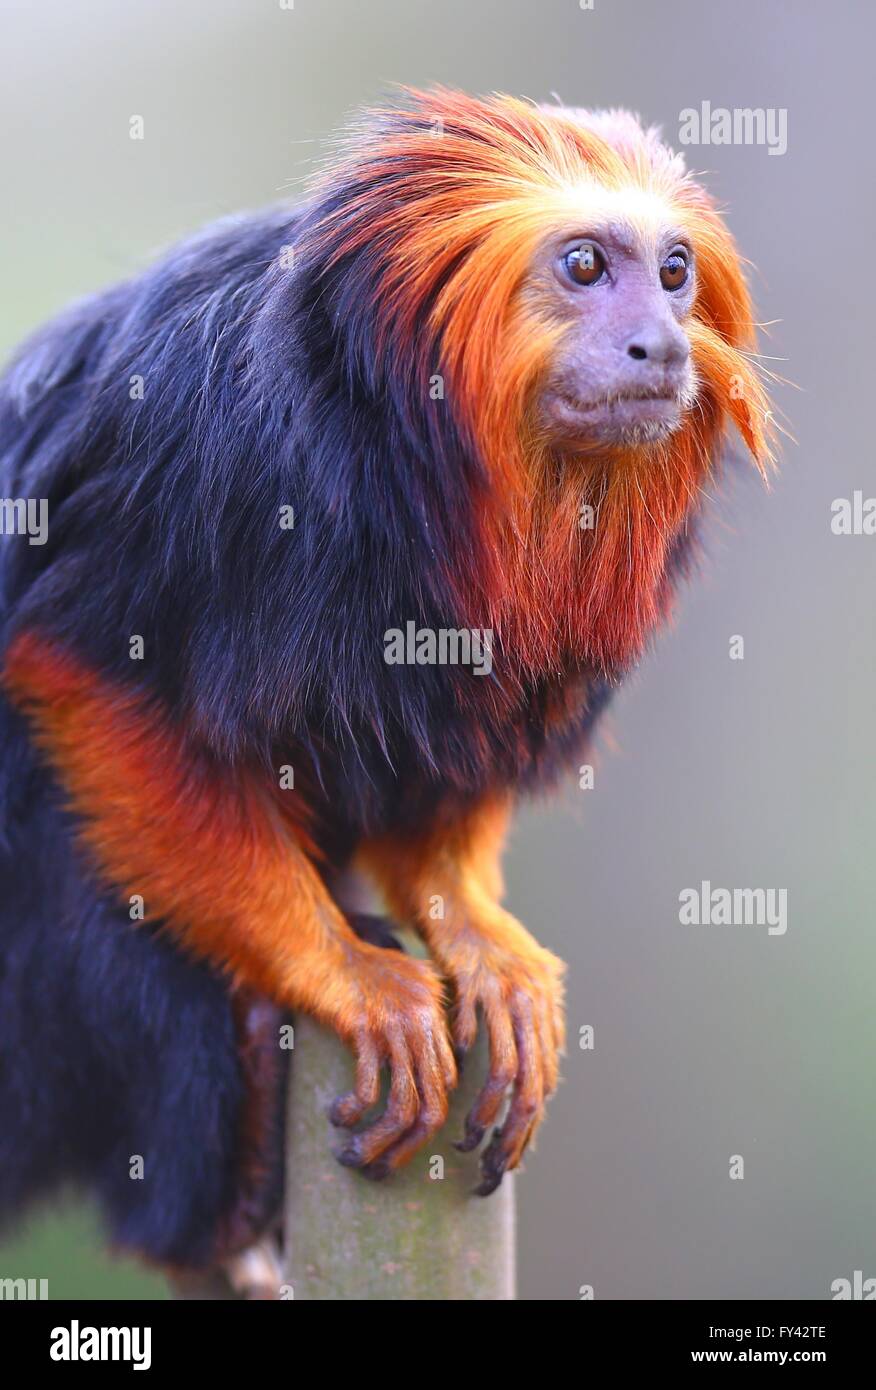 Brussels. 3rd Apr, 2016. Photo taken on April 3, 2016 show a golden-headed lion tamarin at the Planckendael Zoo in Mechelen, north Belgium. Golden-headed lion tamarins, native to Brazil, go outdoors recently as the temperature exceeded 15 degrees Celsius here. © Gong Bing/Xinhua/Alamy Live News Stock Photo